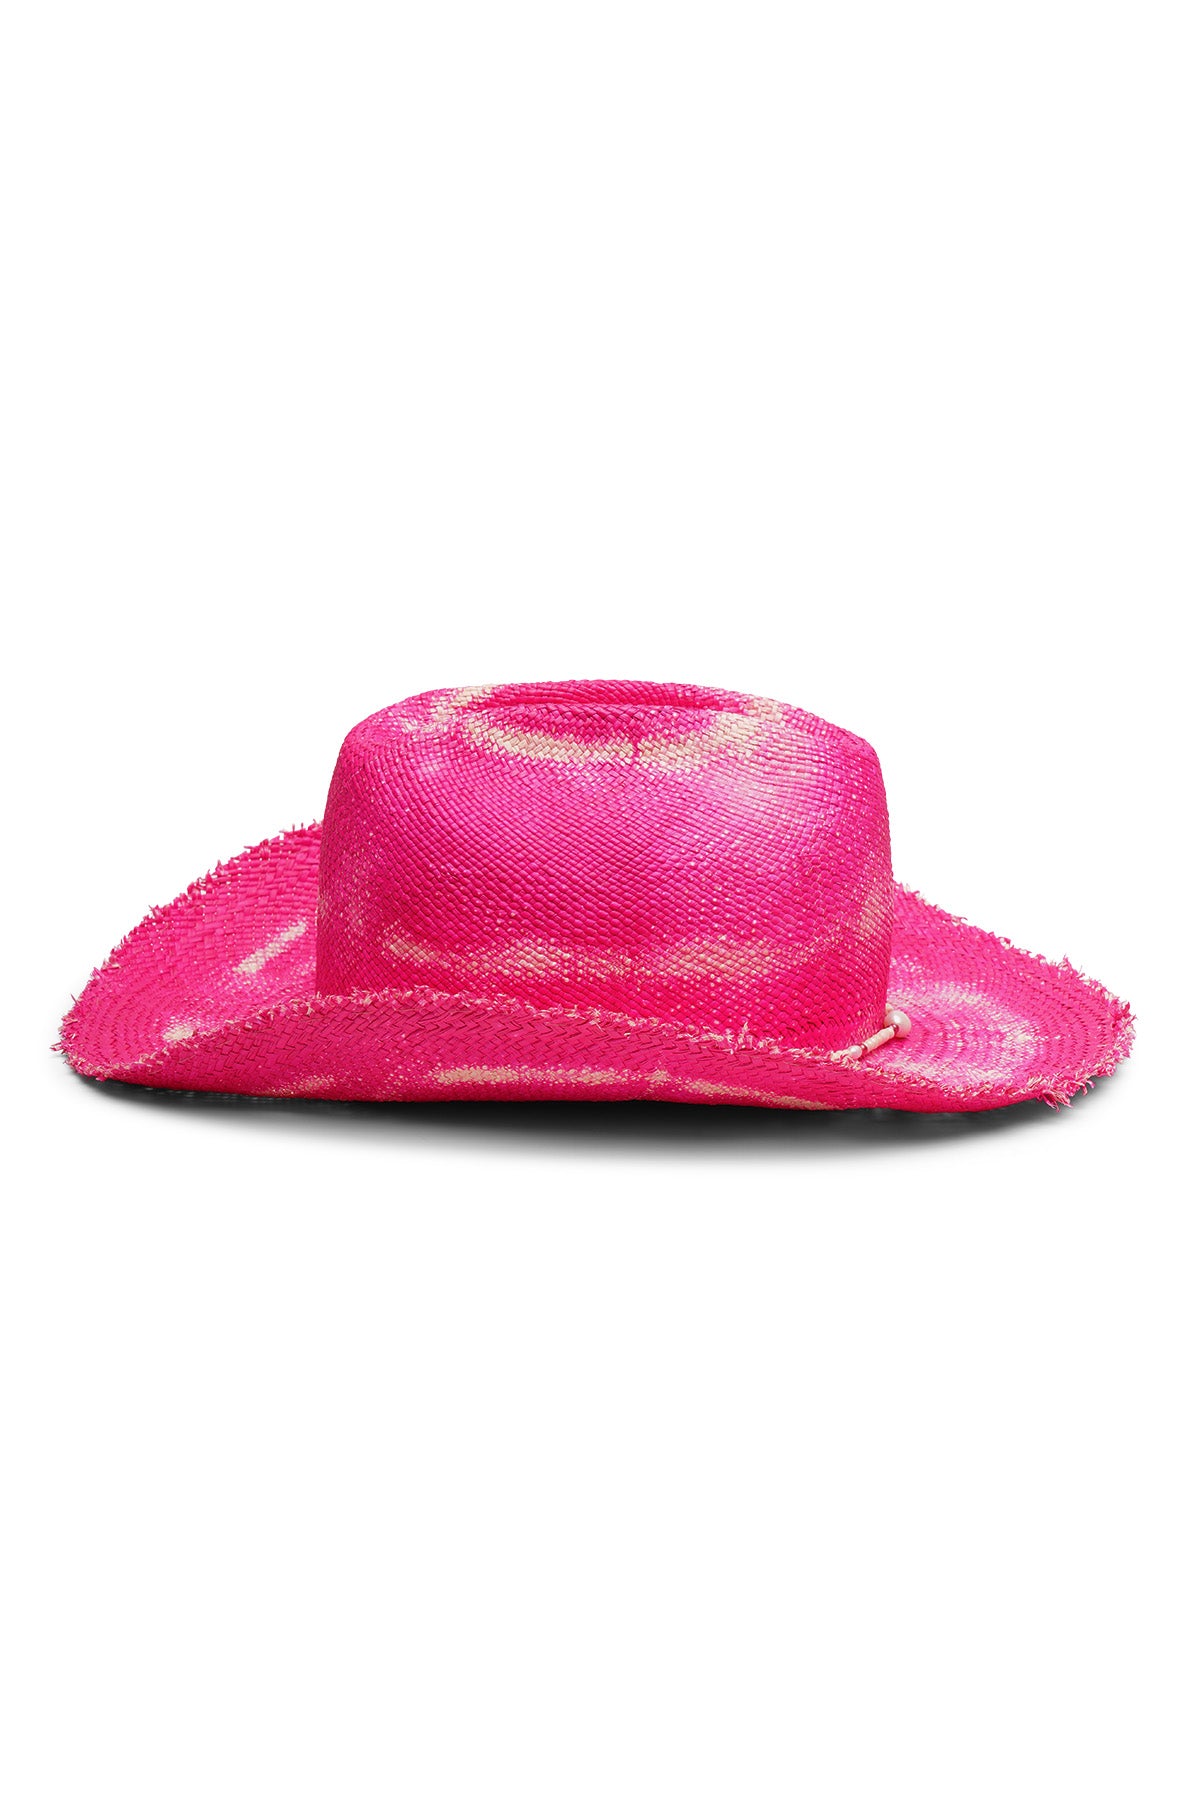 Unisex pink/white tie-dye cowboy straw hat with a wide, flanged brim, frayed edges, and center crease. Seed beads and saltwater pearls detail, handcrafted by SoonNoon in Stockholm